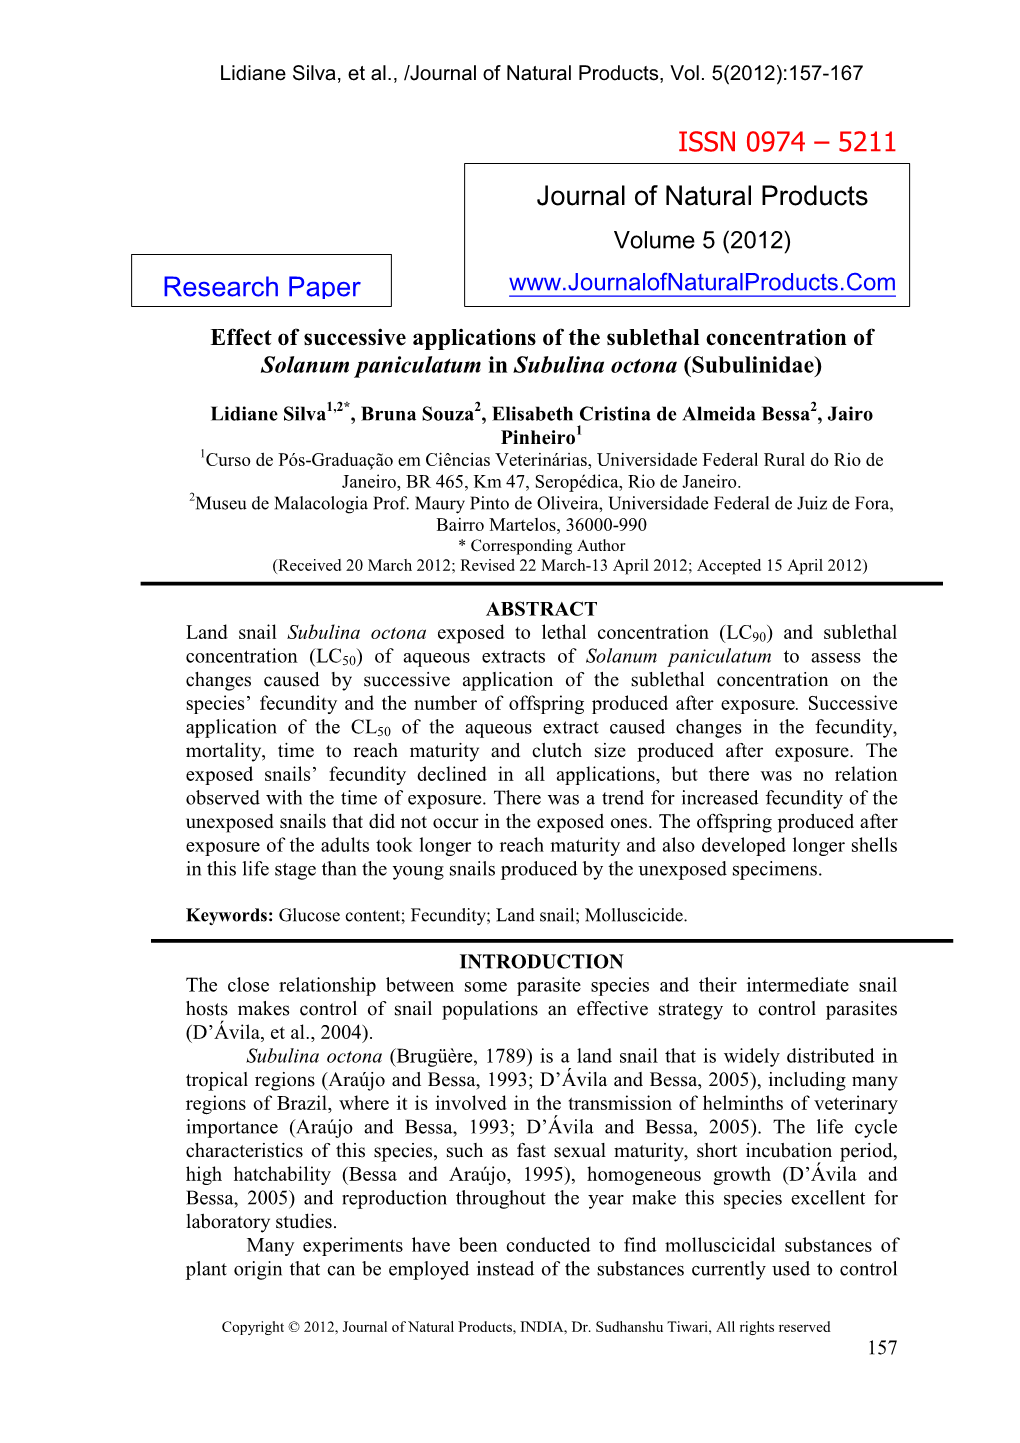 ISSN 0974 – 5211 Journal of Natural Products Research Paper